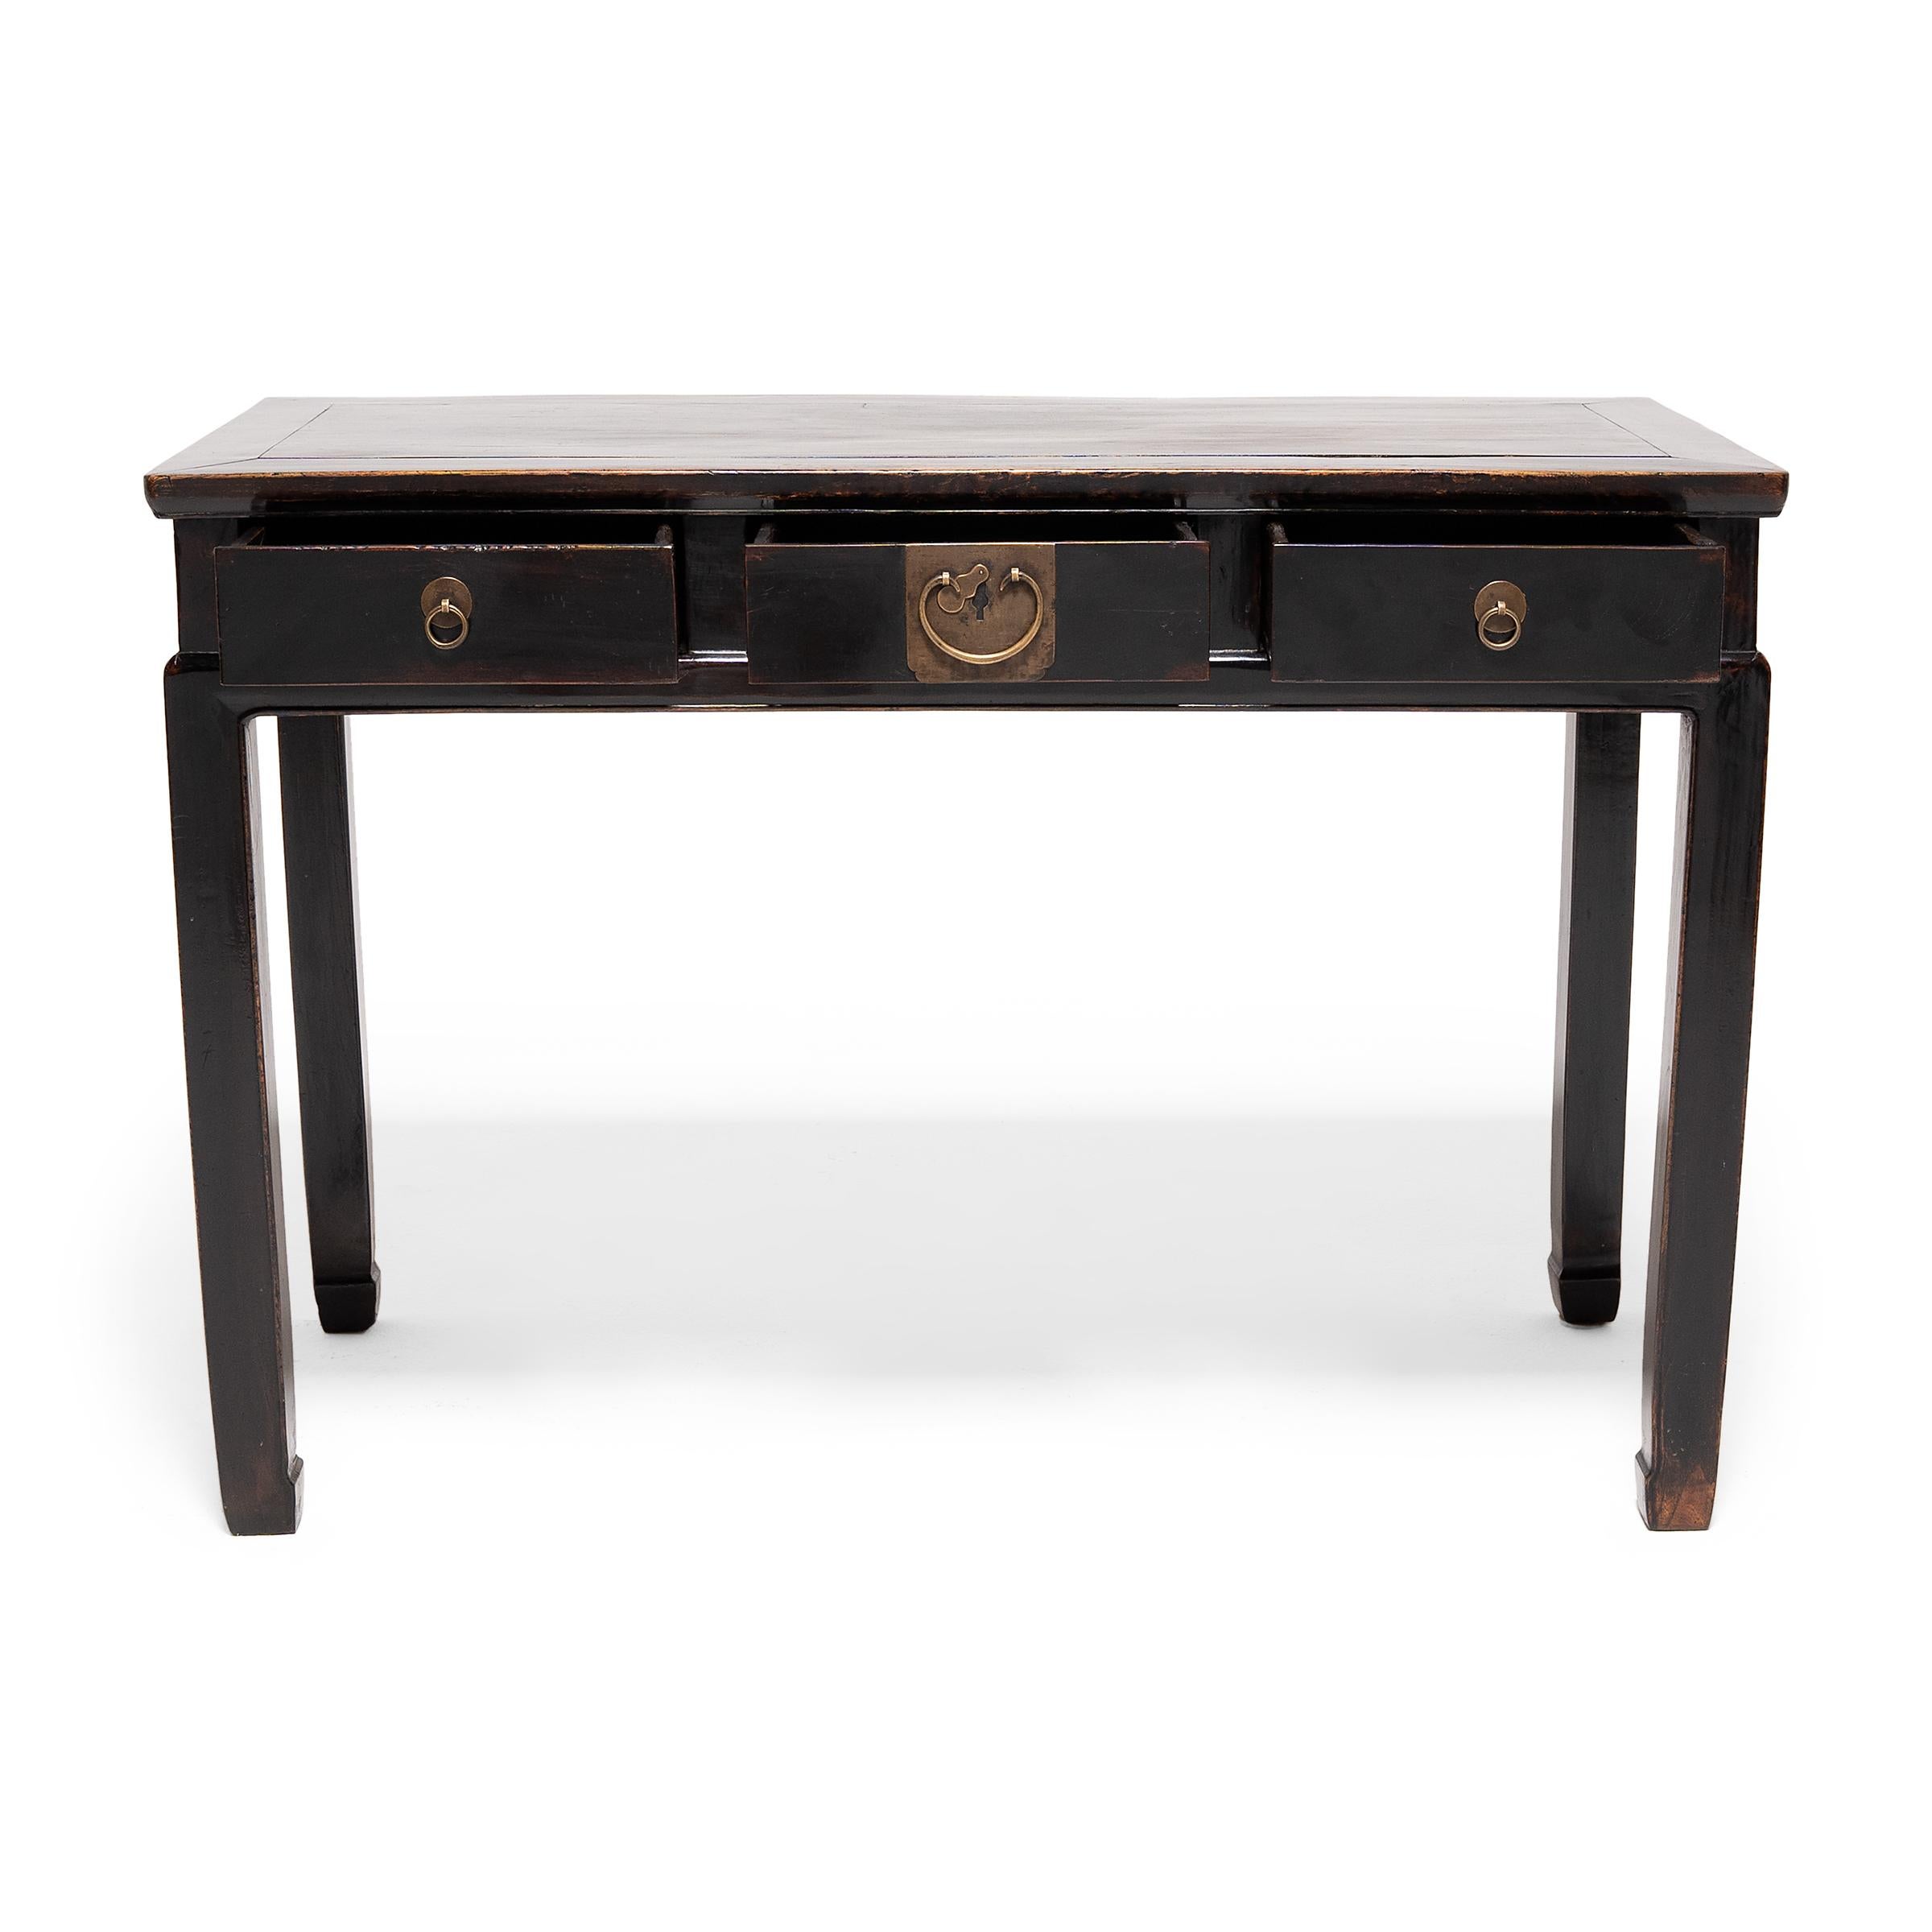 Lacquered Chinese Black Lacquer Writing Desk, C. 1850